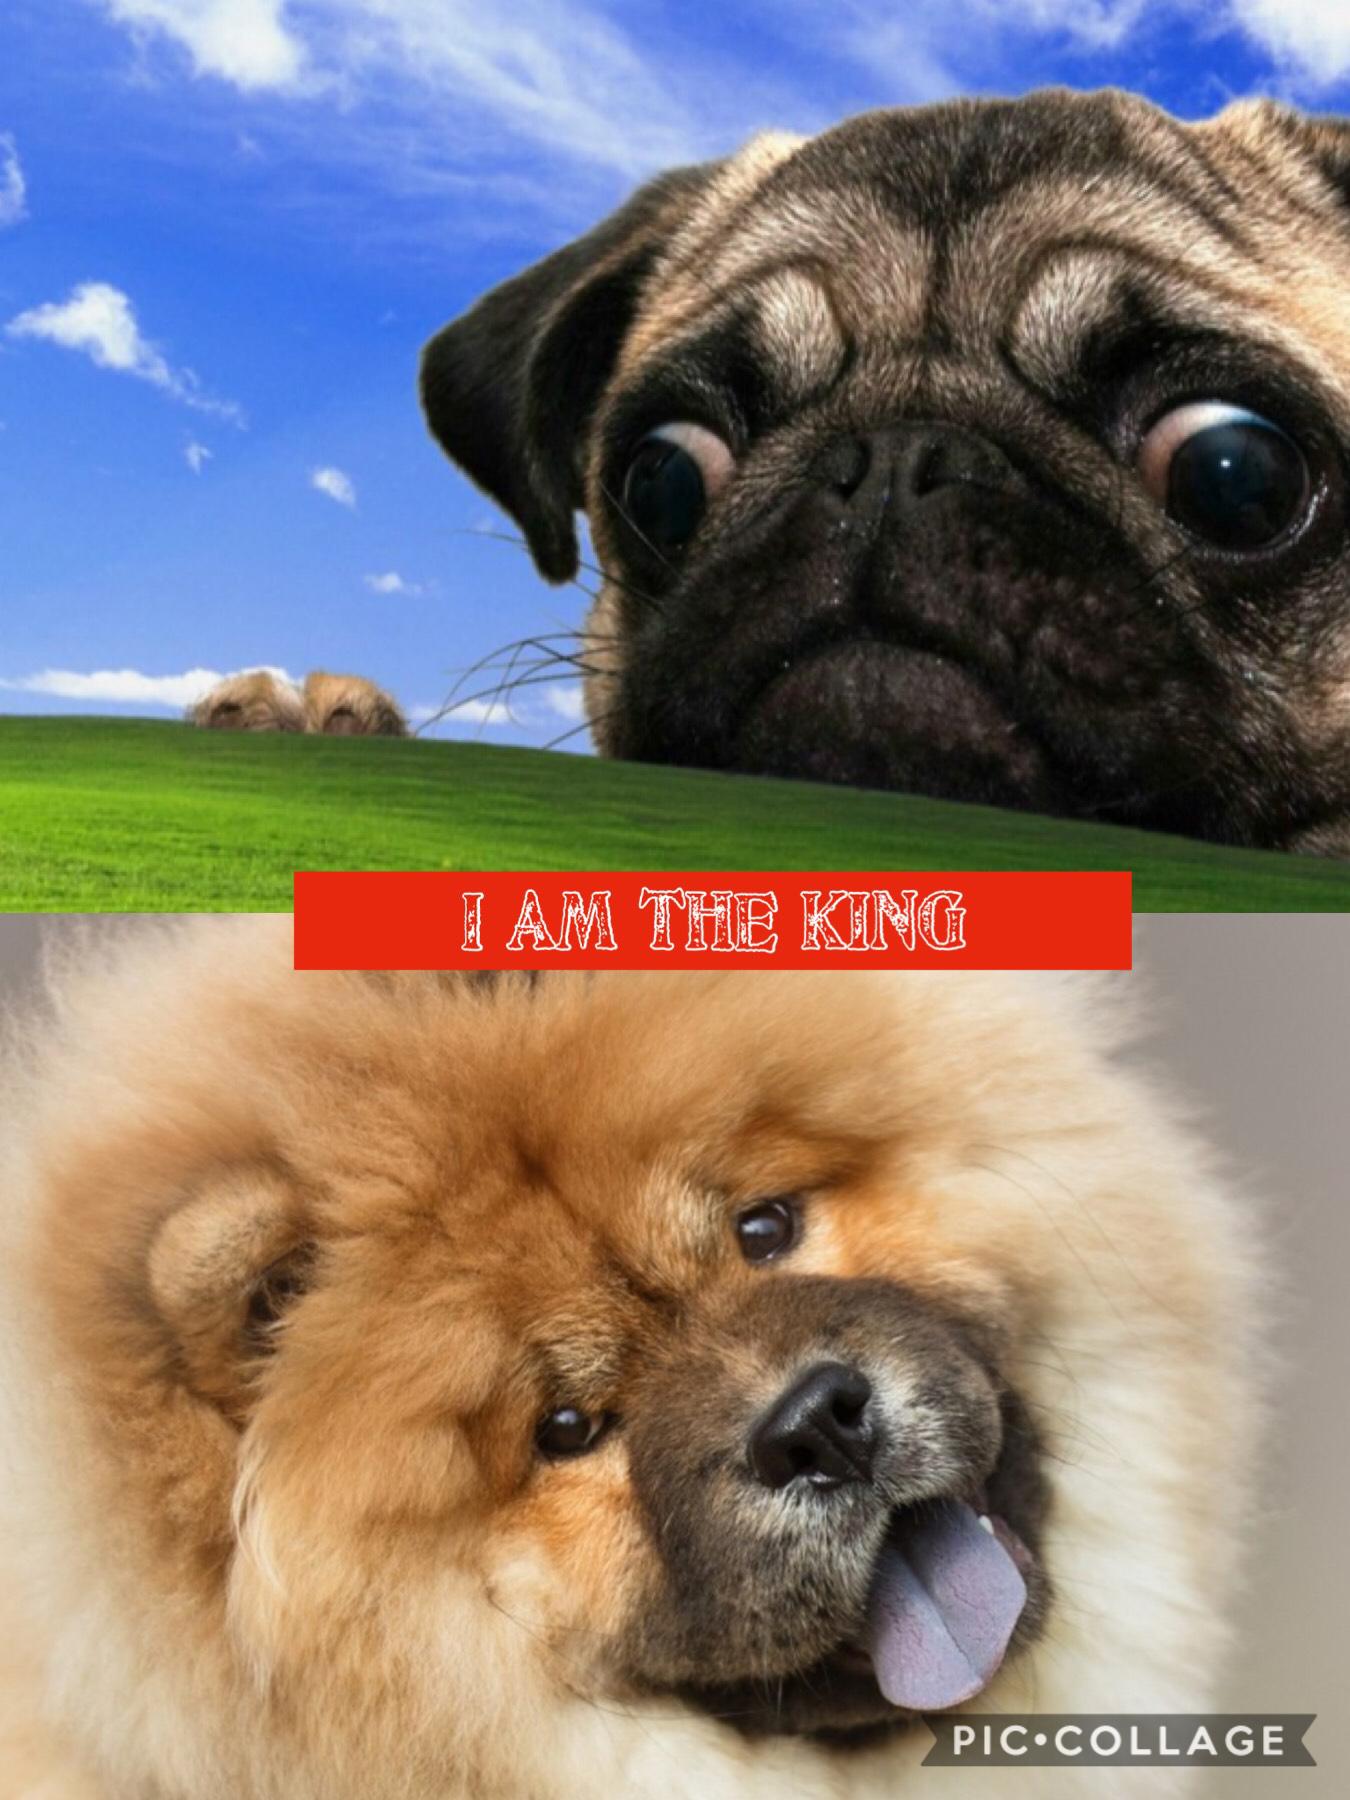 King of the dogs
🐶 LOL
^_^